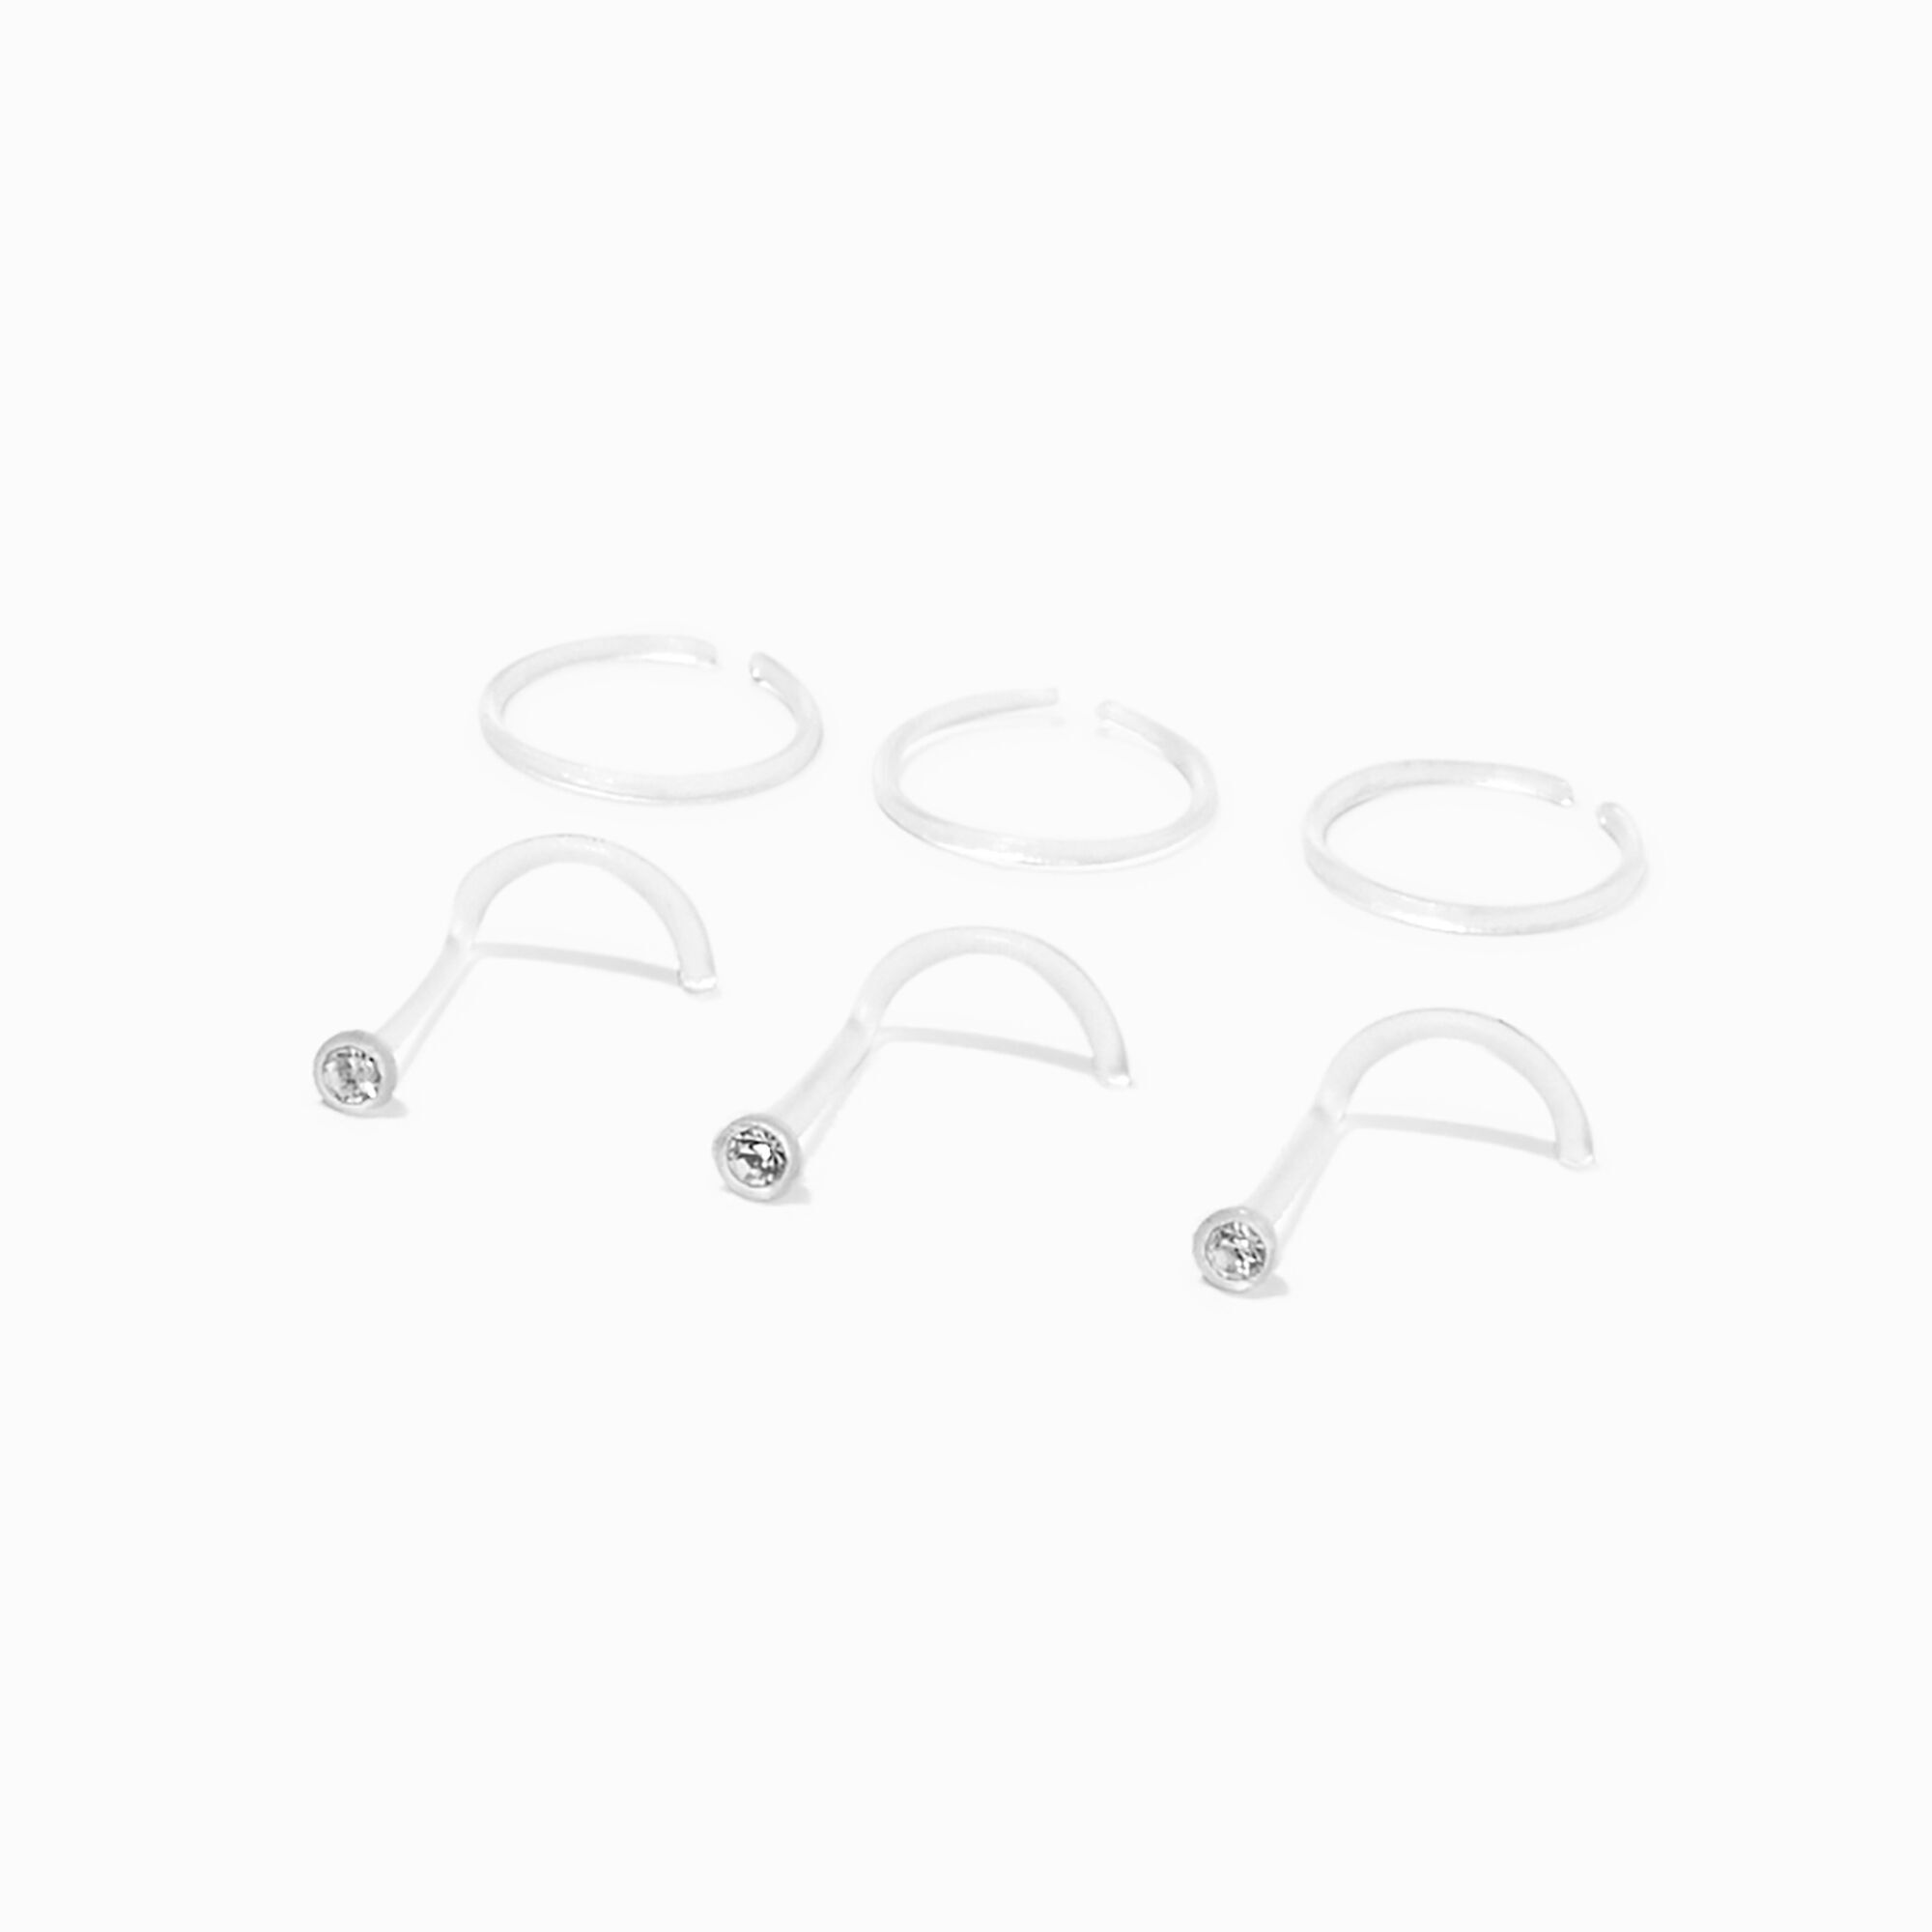 View Claires Mixed Bioflex Stud Hoop 20G Nose Rings 6 Pack information